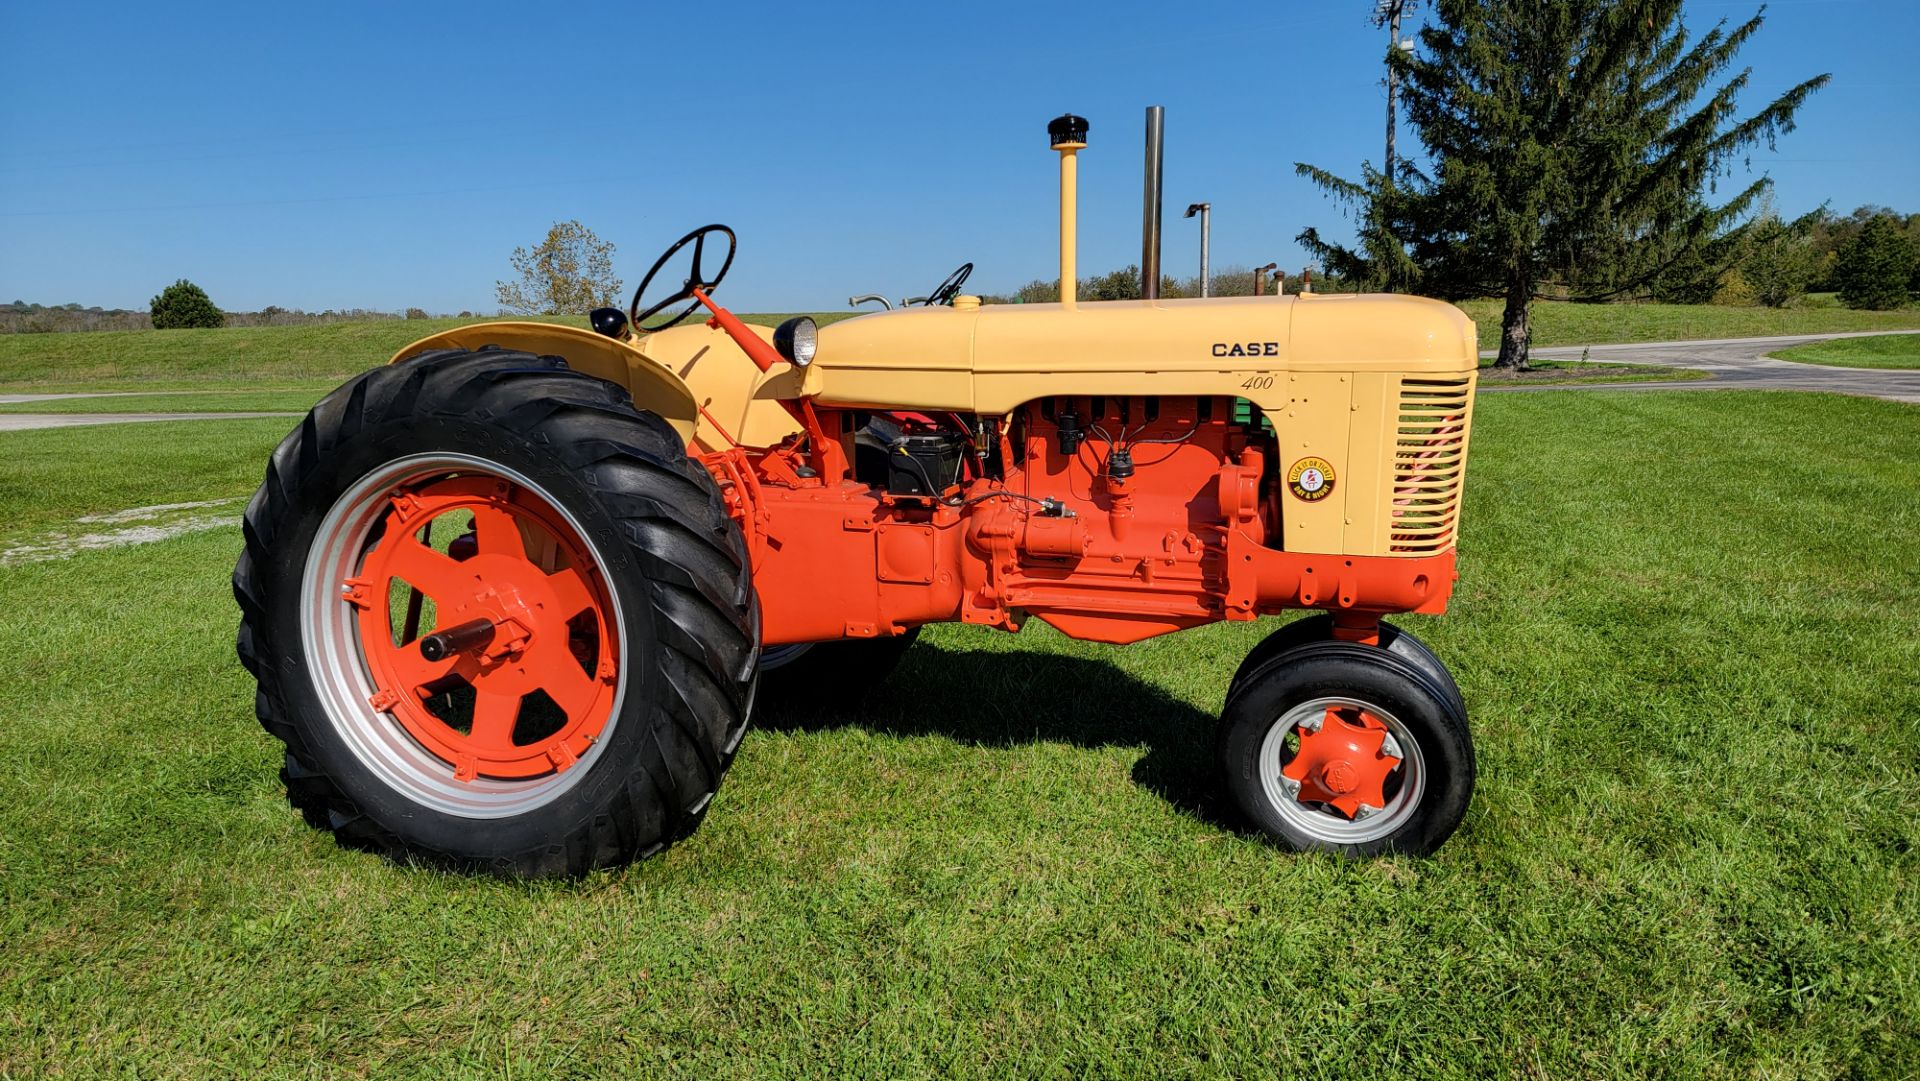 1956 Case 400 Row Crop Tractor, Model 411, s/n 8081224, Gasoline Engine, New in 1956, Restored - Image 7 of 32